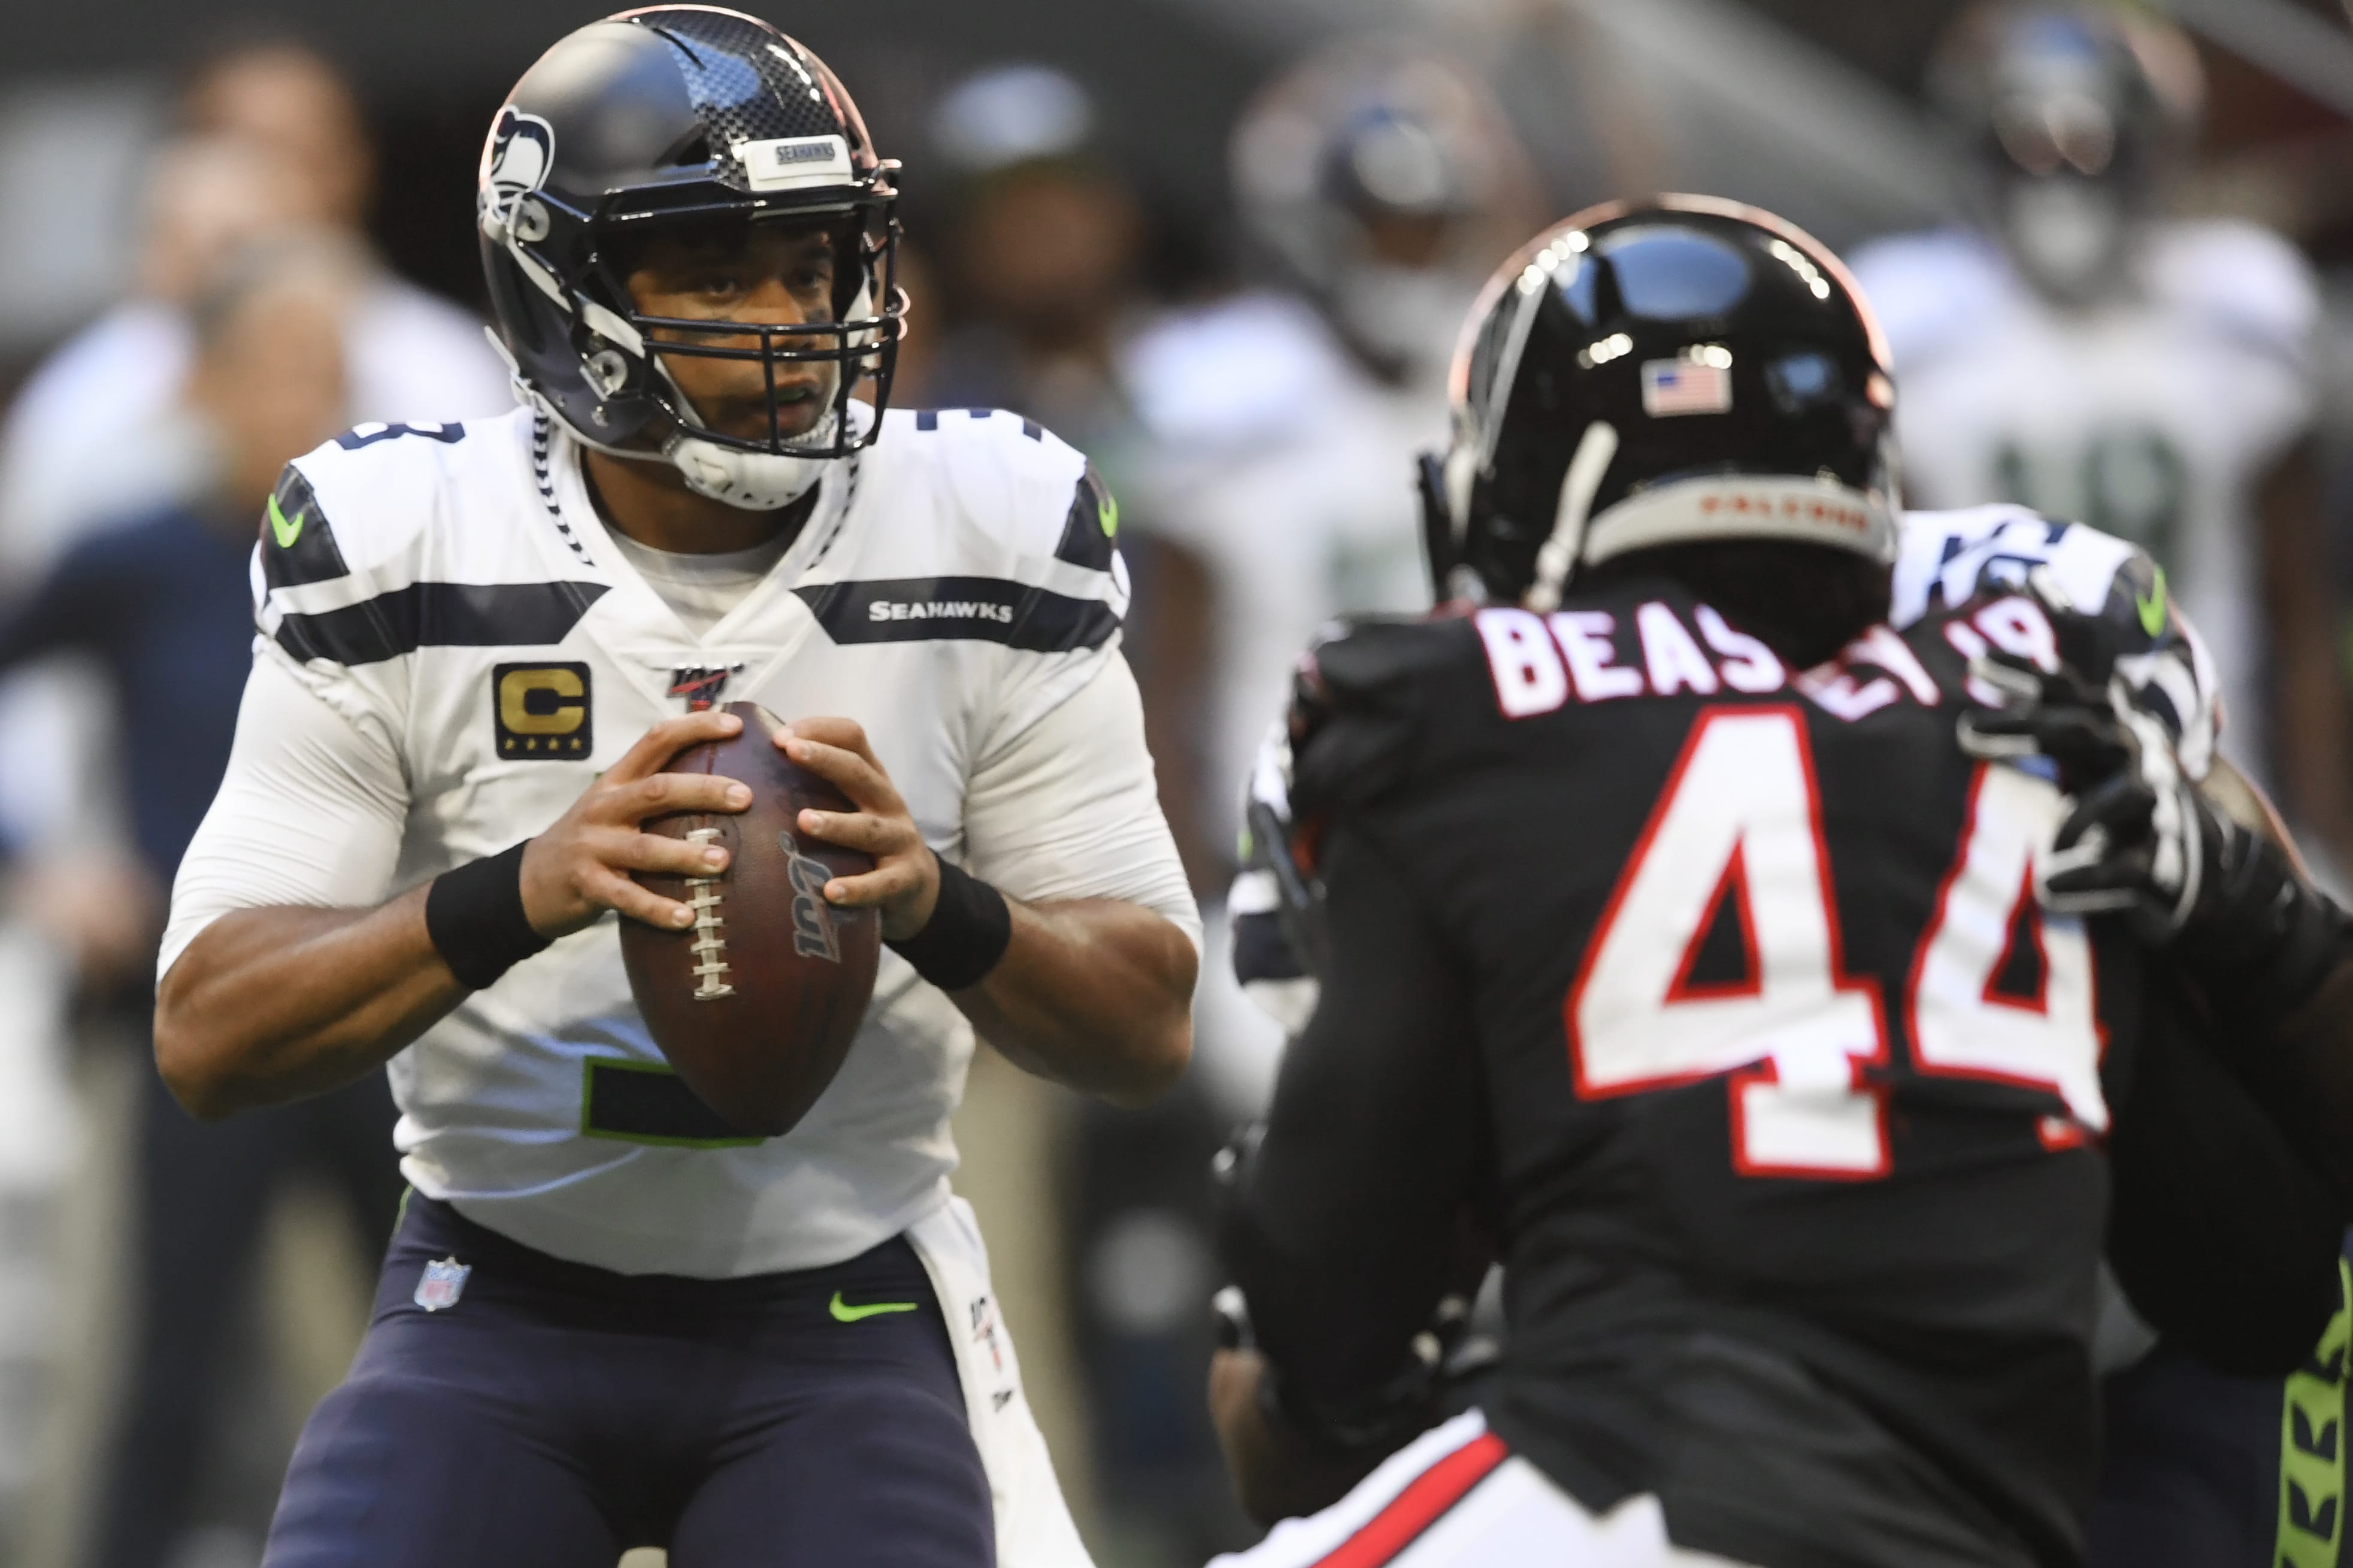 Seattle Seahawks quarterback Russell Wilson (3) works in the pocket as Atlanta Falcons defensive end Vic Beasley (44) pressures during the first half of an NFL football game, Sunday, Oct. 27, 2019, in Atlanta.